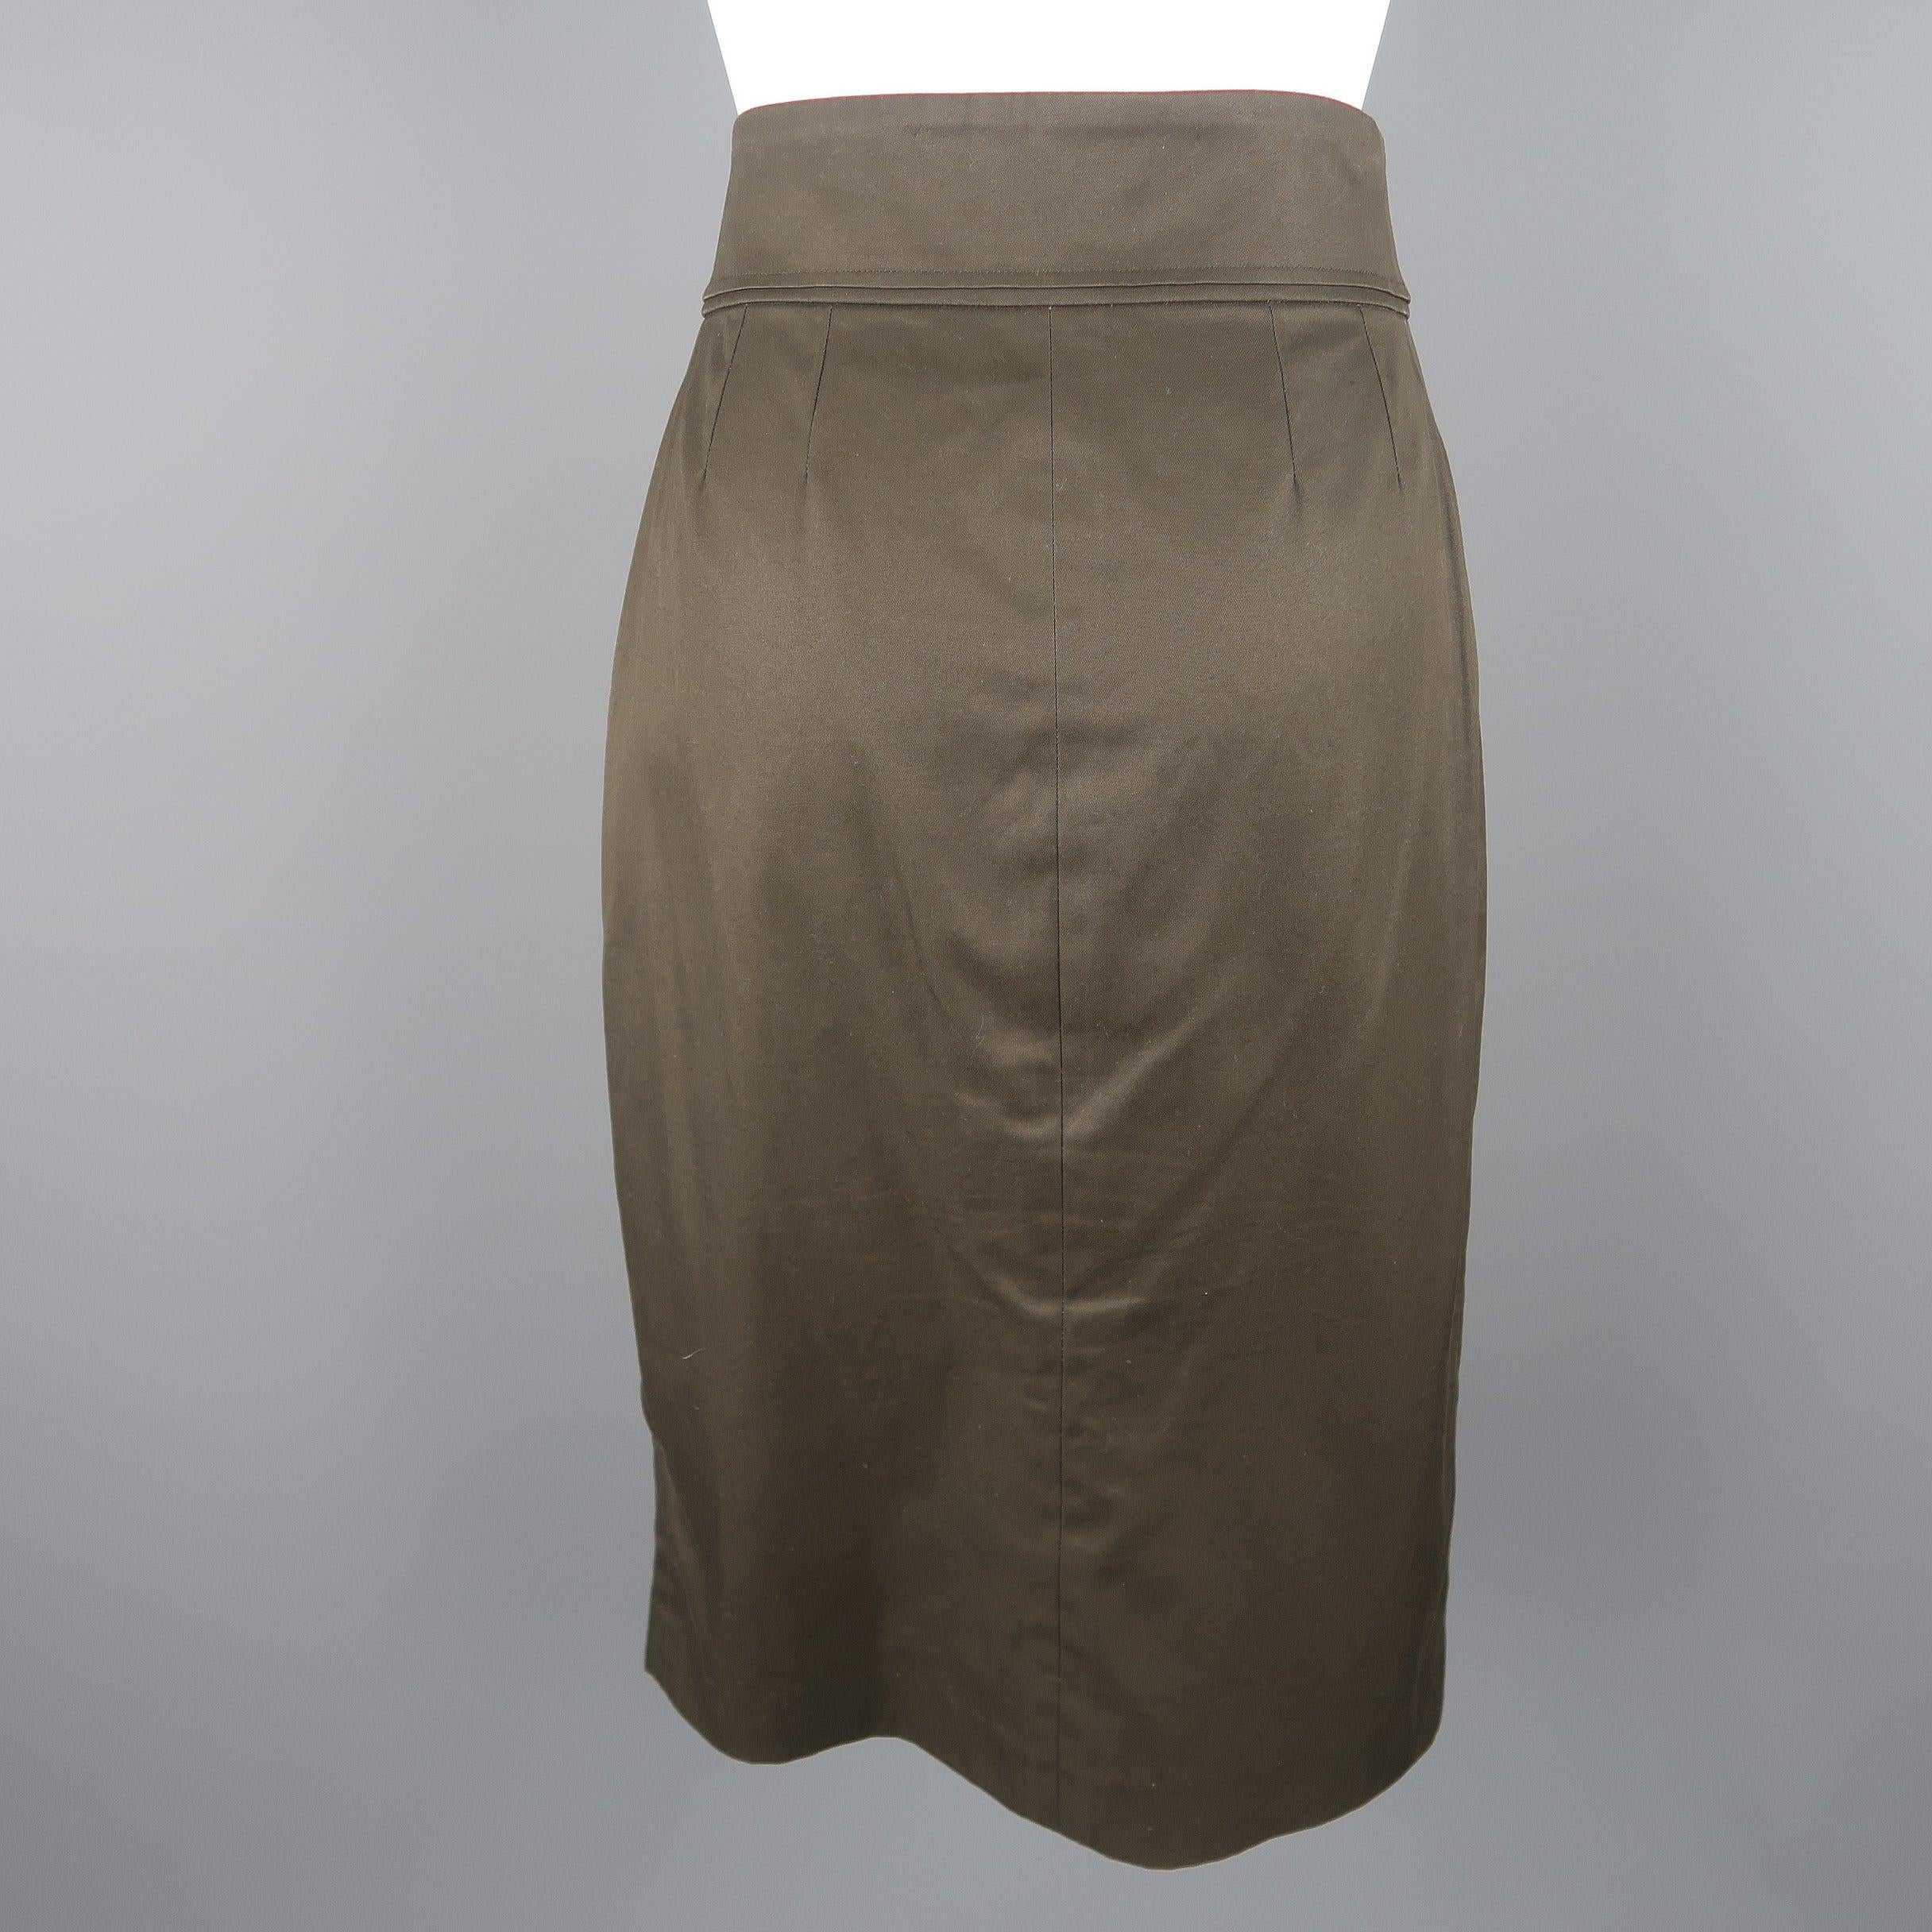 YVES SAINT LAURENT by TOM FORD Size 8 Dark Green Cotton Pencil Skirt In Good Condition For Sale In San Francisco, CA